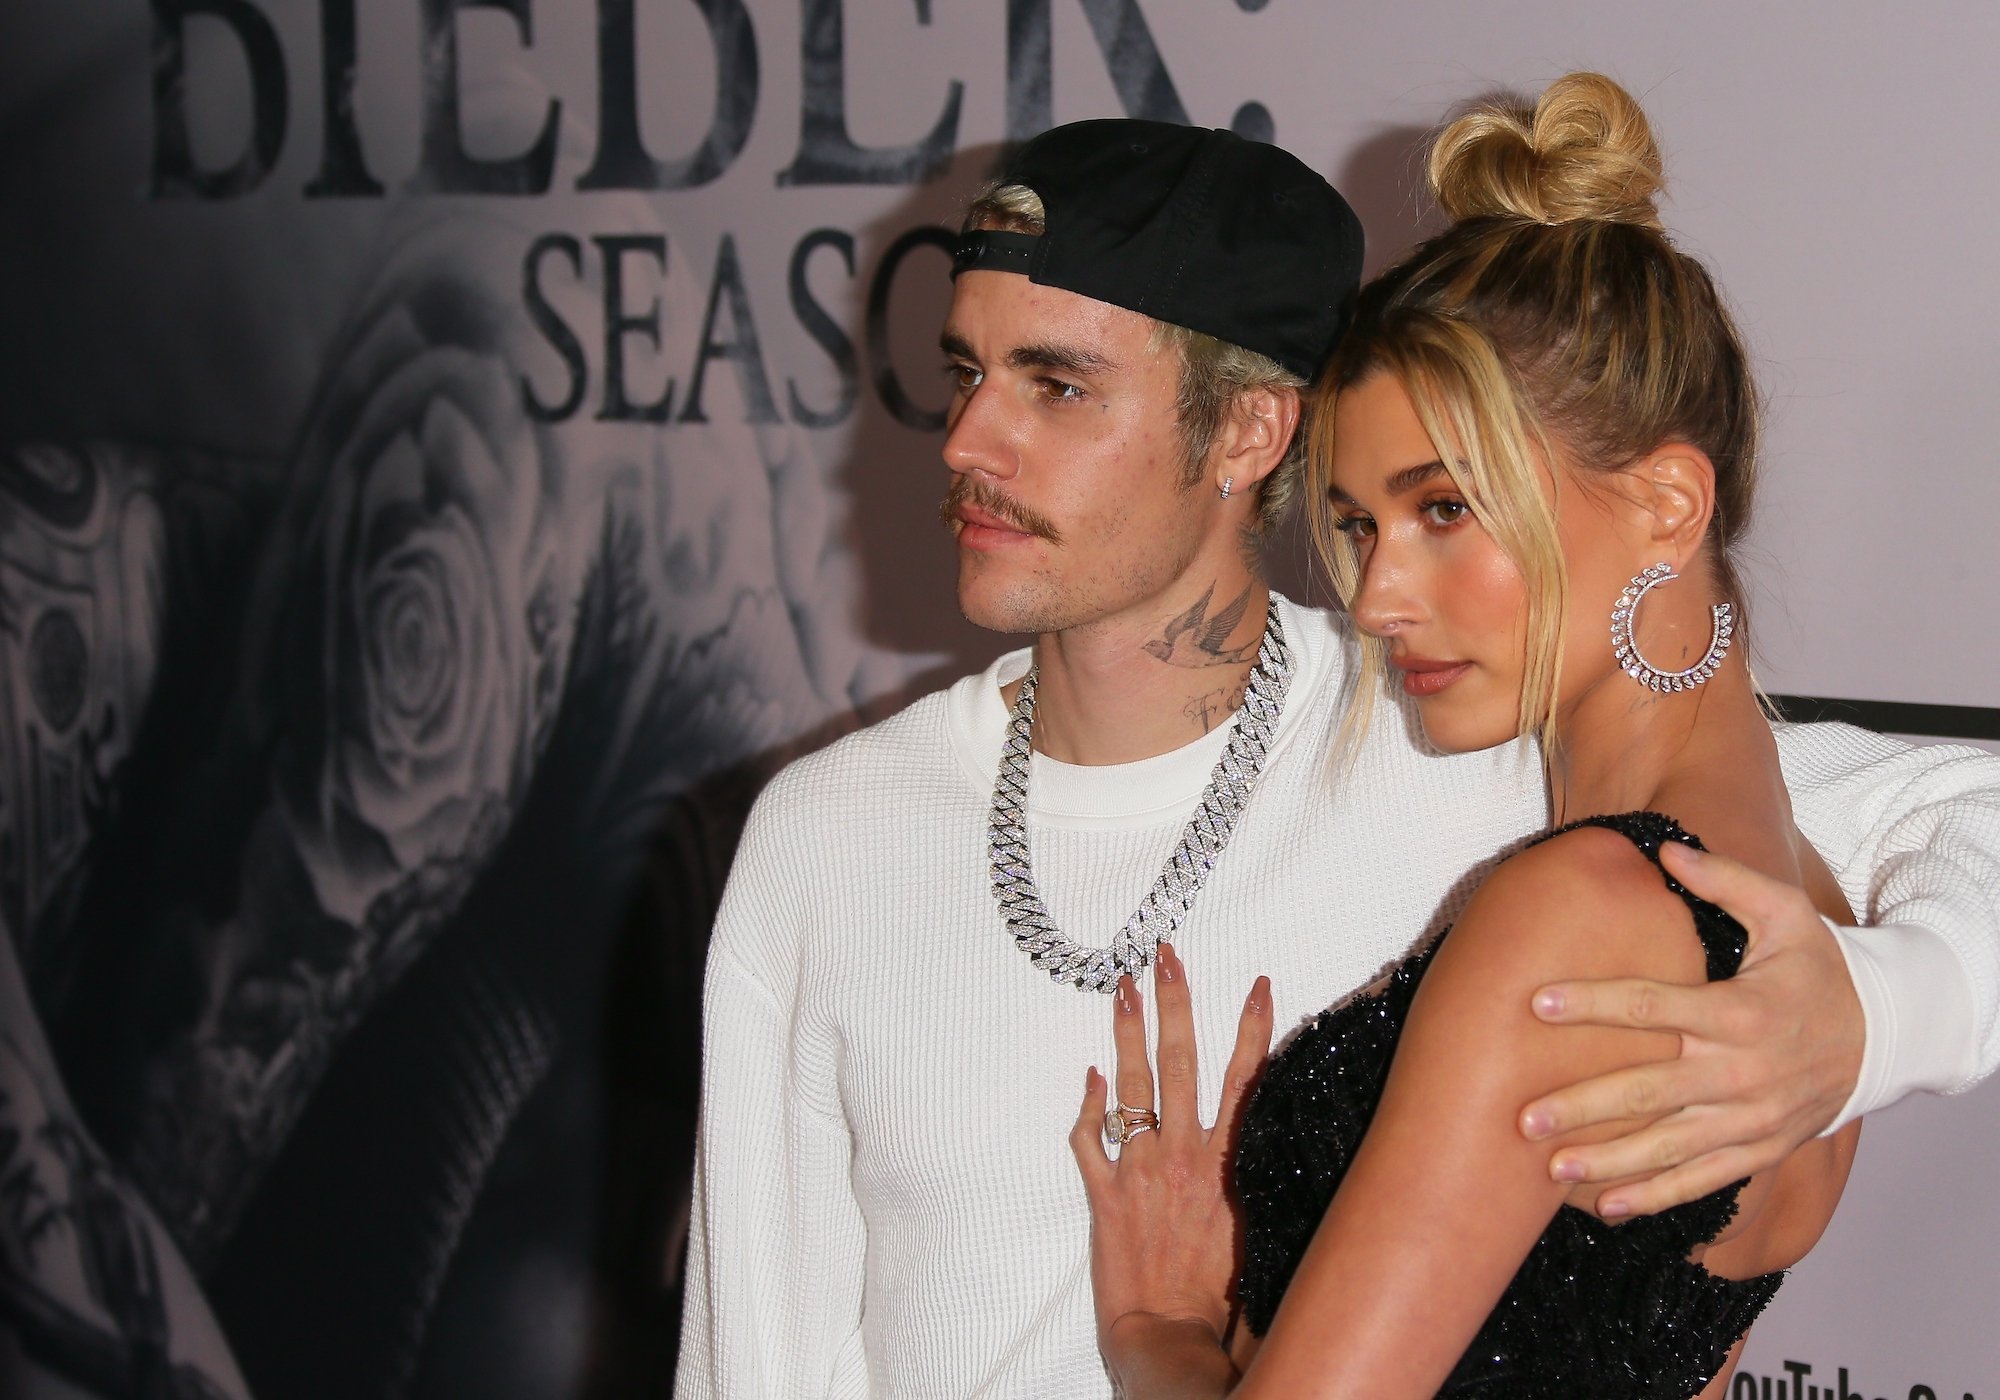 Justin Bieber S Justice Lyrics Reveal Details Of His Relationship With Hailey Baldwin